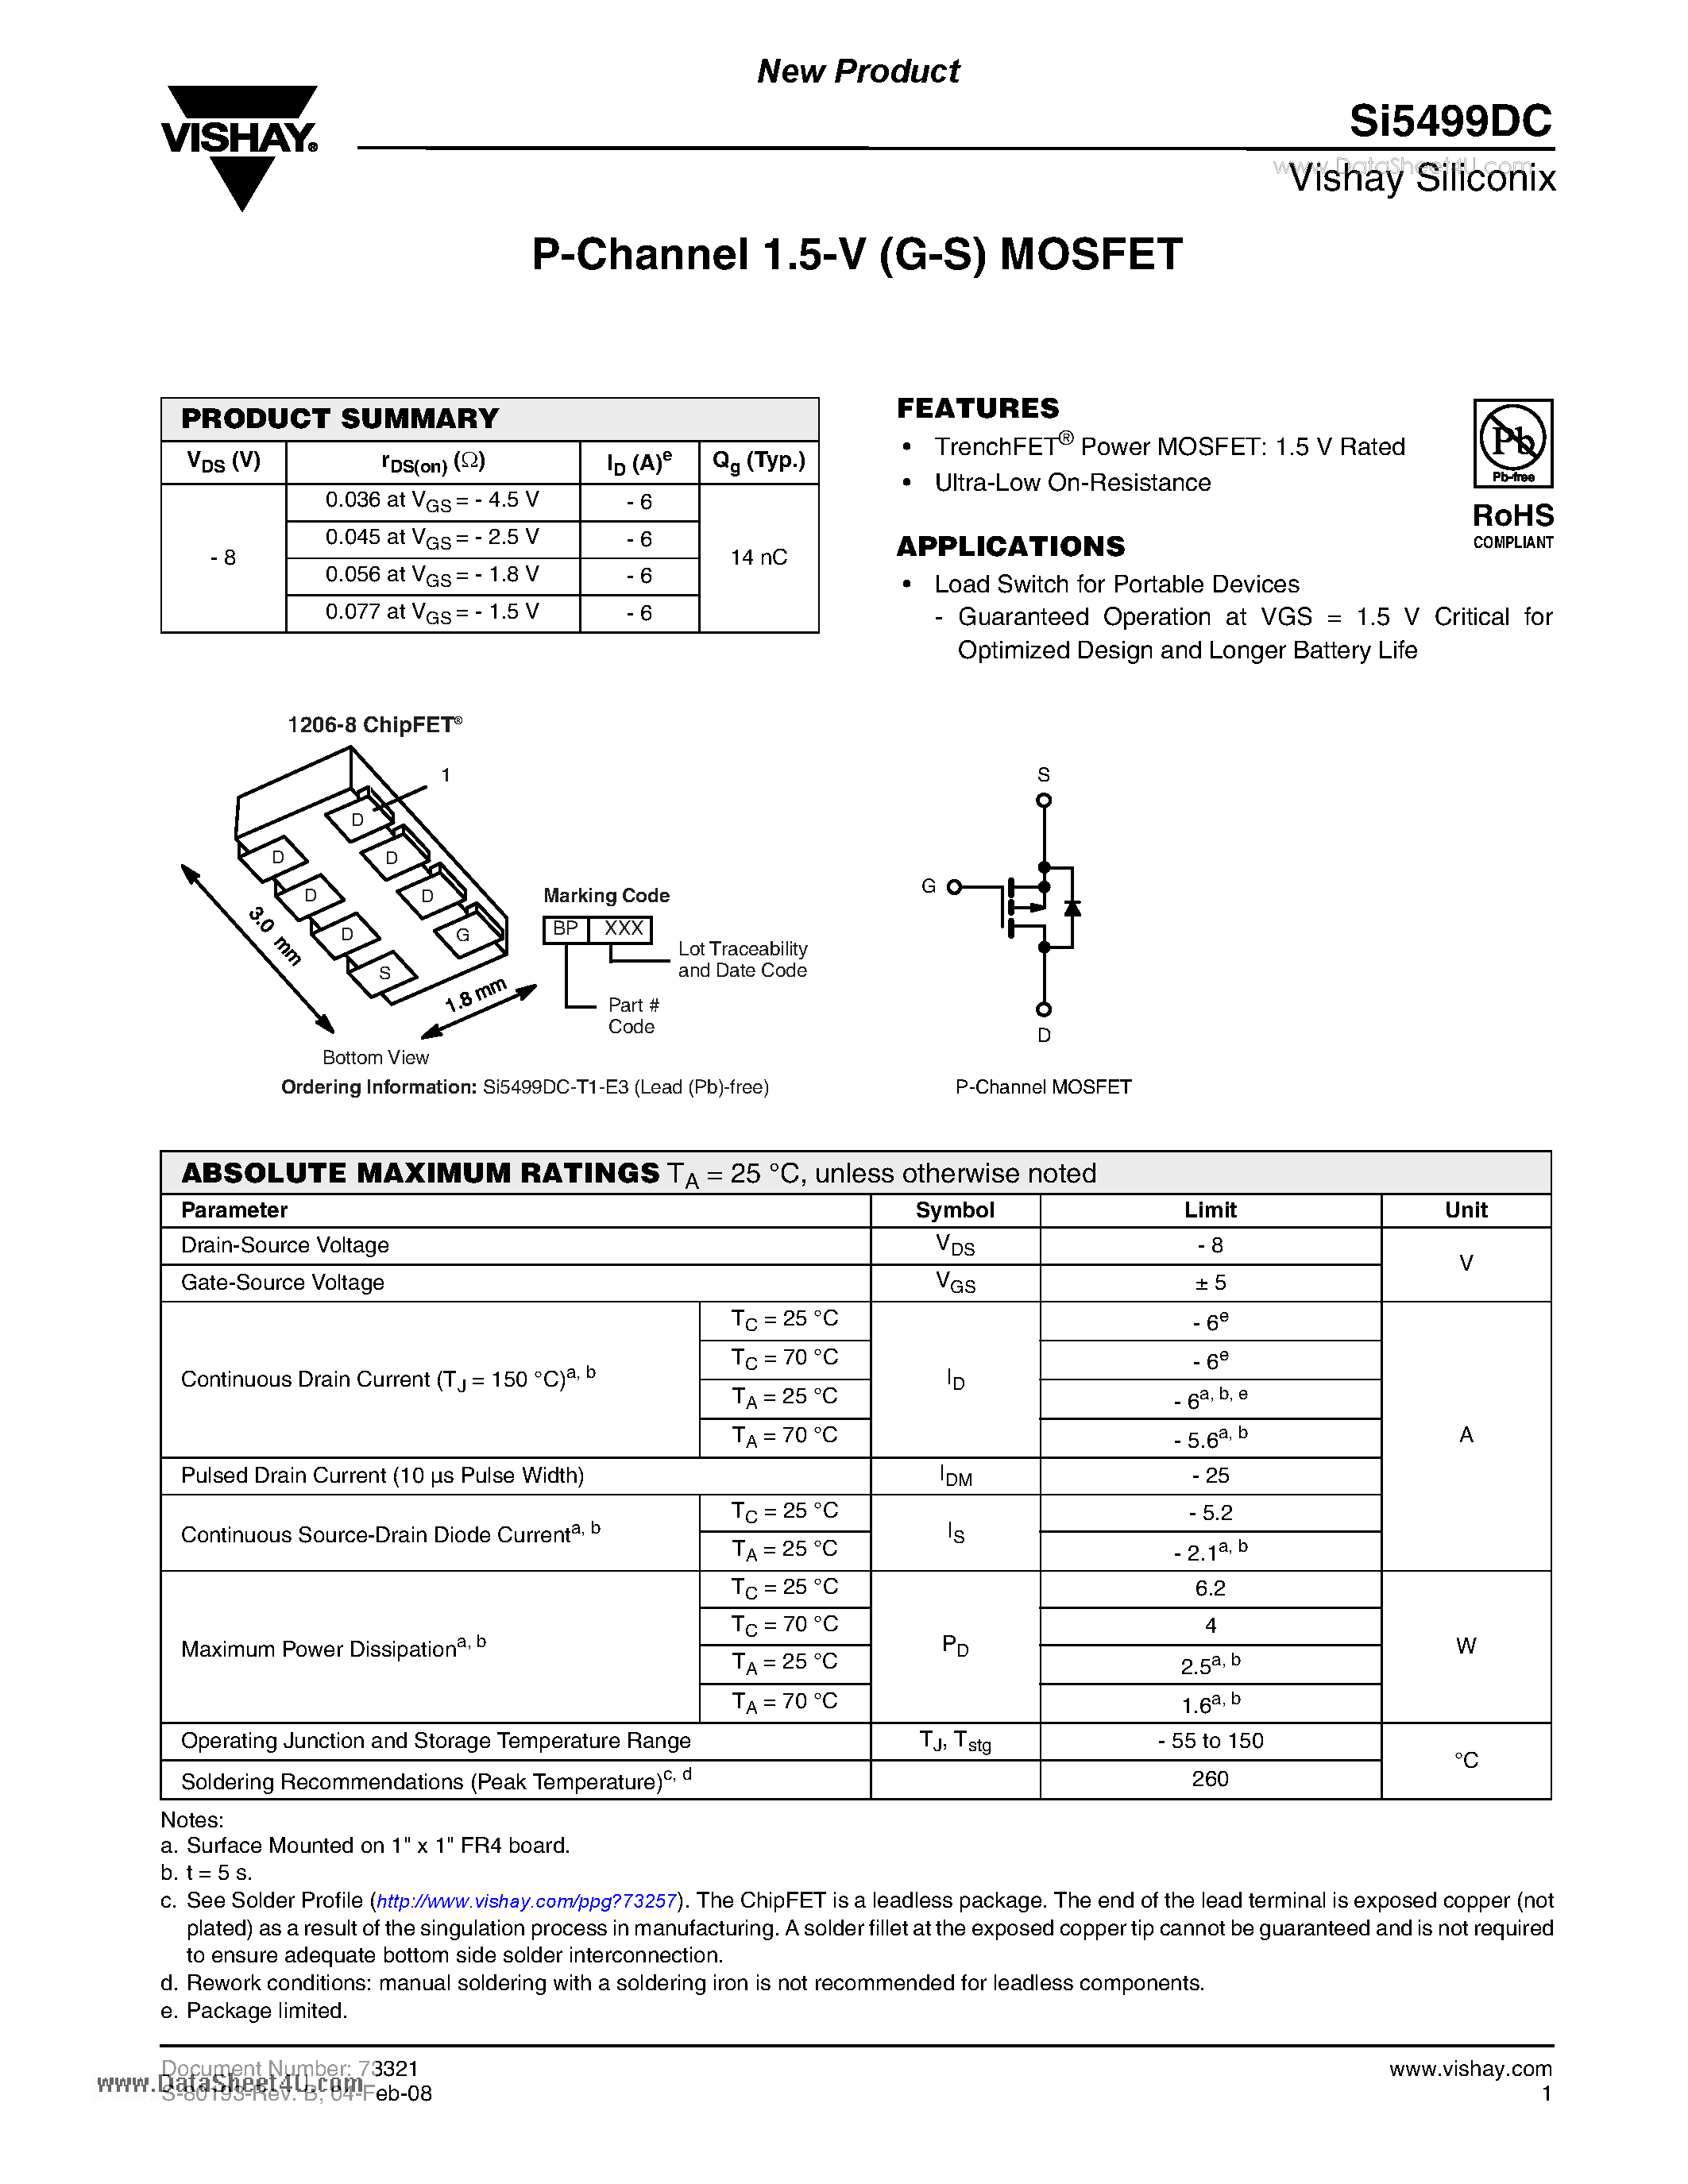 Даташит Si5499DC - P-Channel 1.5-V (G-S) MOSFET страница 1